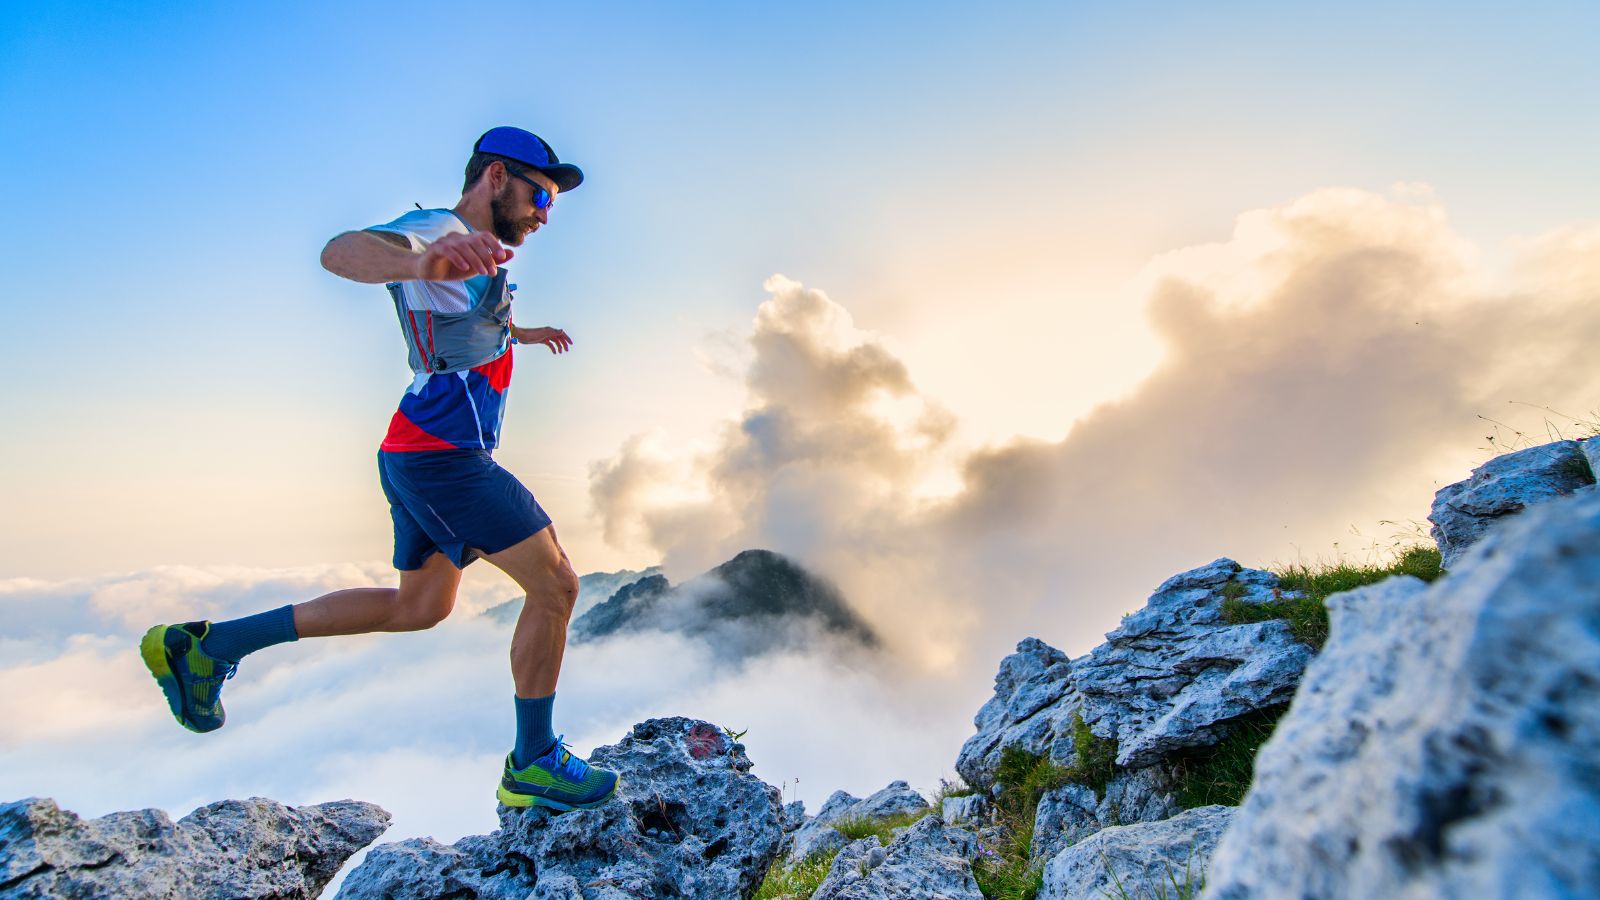 <p>When it comes to racing internationally, there are so many amazing races to choose from. From the Alps of Europe to the Sahara Desert, there is a race for everyone looking to push themselves to the limit.</p> <p>An ultramarathon is considered anything that’s over a marathon, so usually 50 kilometers or more. They can be on different terrains like mountain trails or flat pavement. Ultra races are a great way to test your limits and take you to places you might not have ever seen or heard of if it weren’t for these races.</p> <p>I am going to cover the 5 most challenging ultramarathons in the world so that you can know what races to put on your calendar for this year (or so you know what races to avoid).</p>